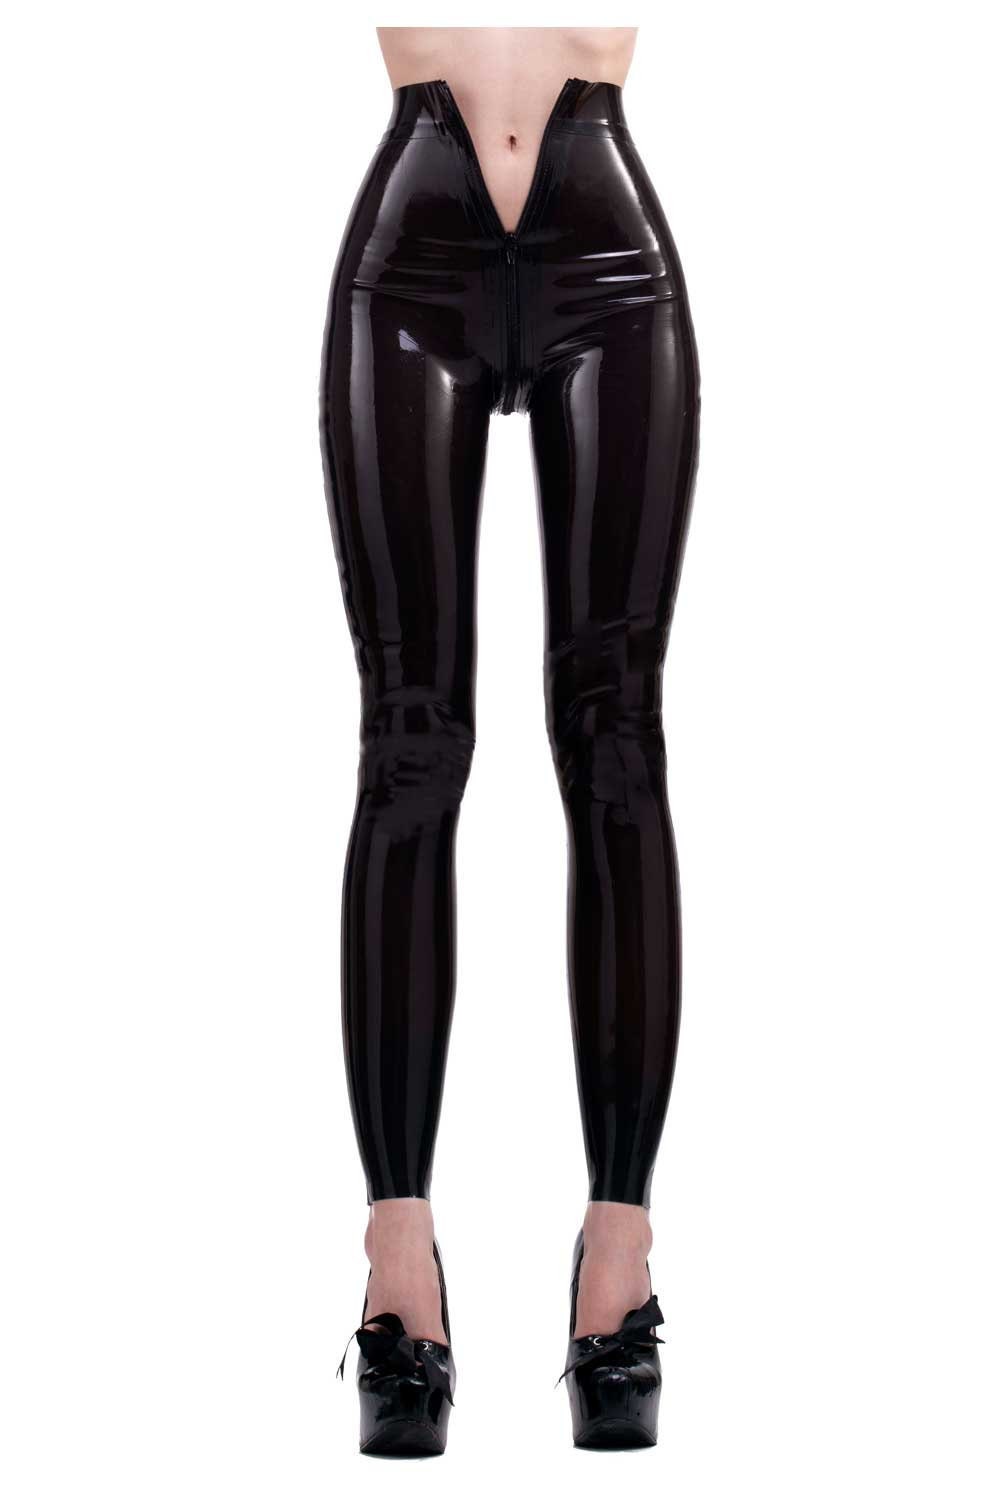 Wet Look High Waisted Leggings Front to Back Metal Zipper Pants Womens or  Unisex